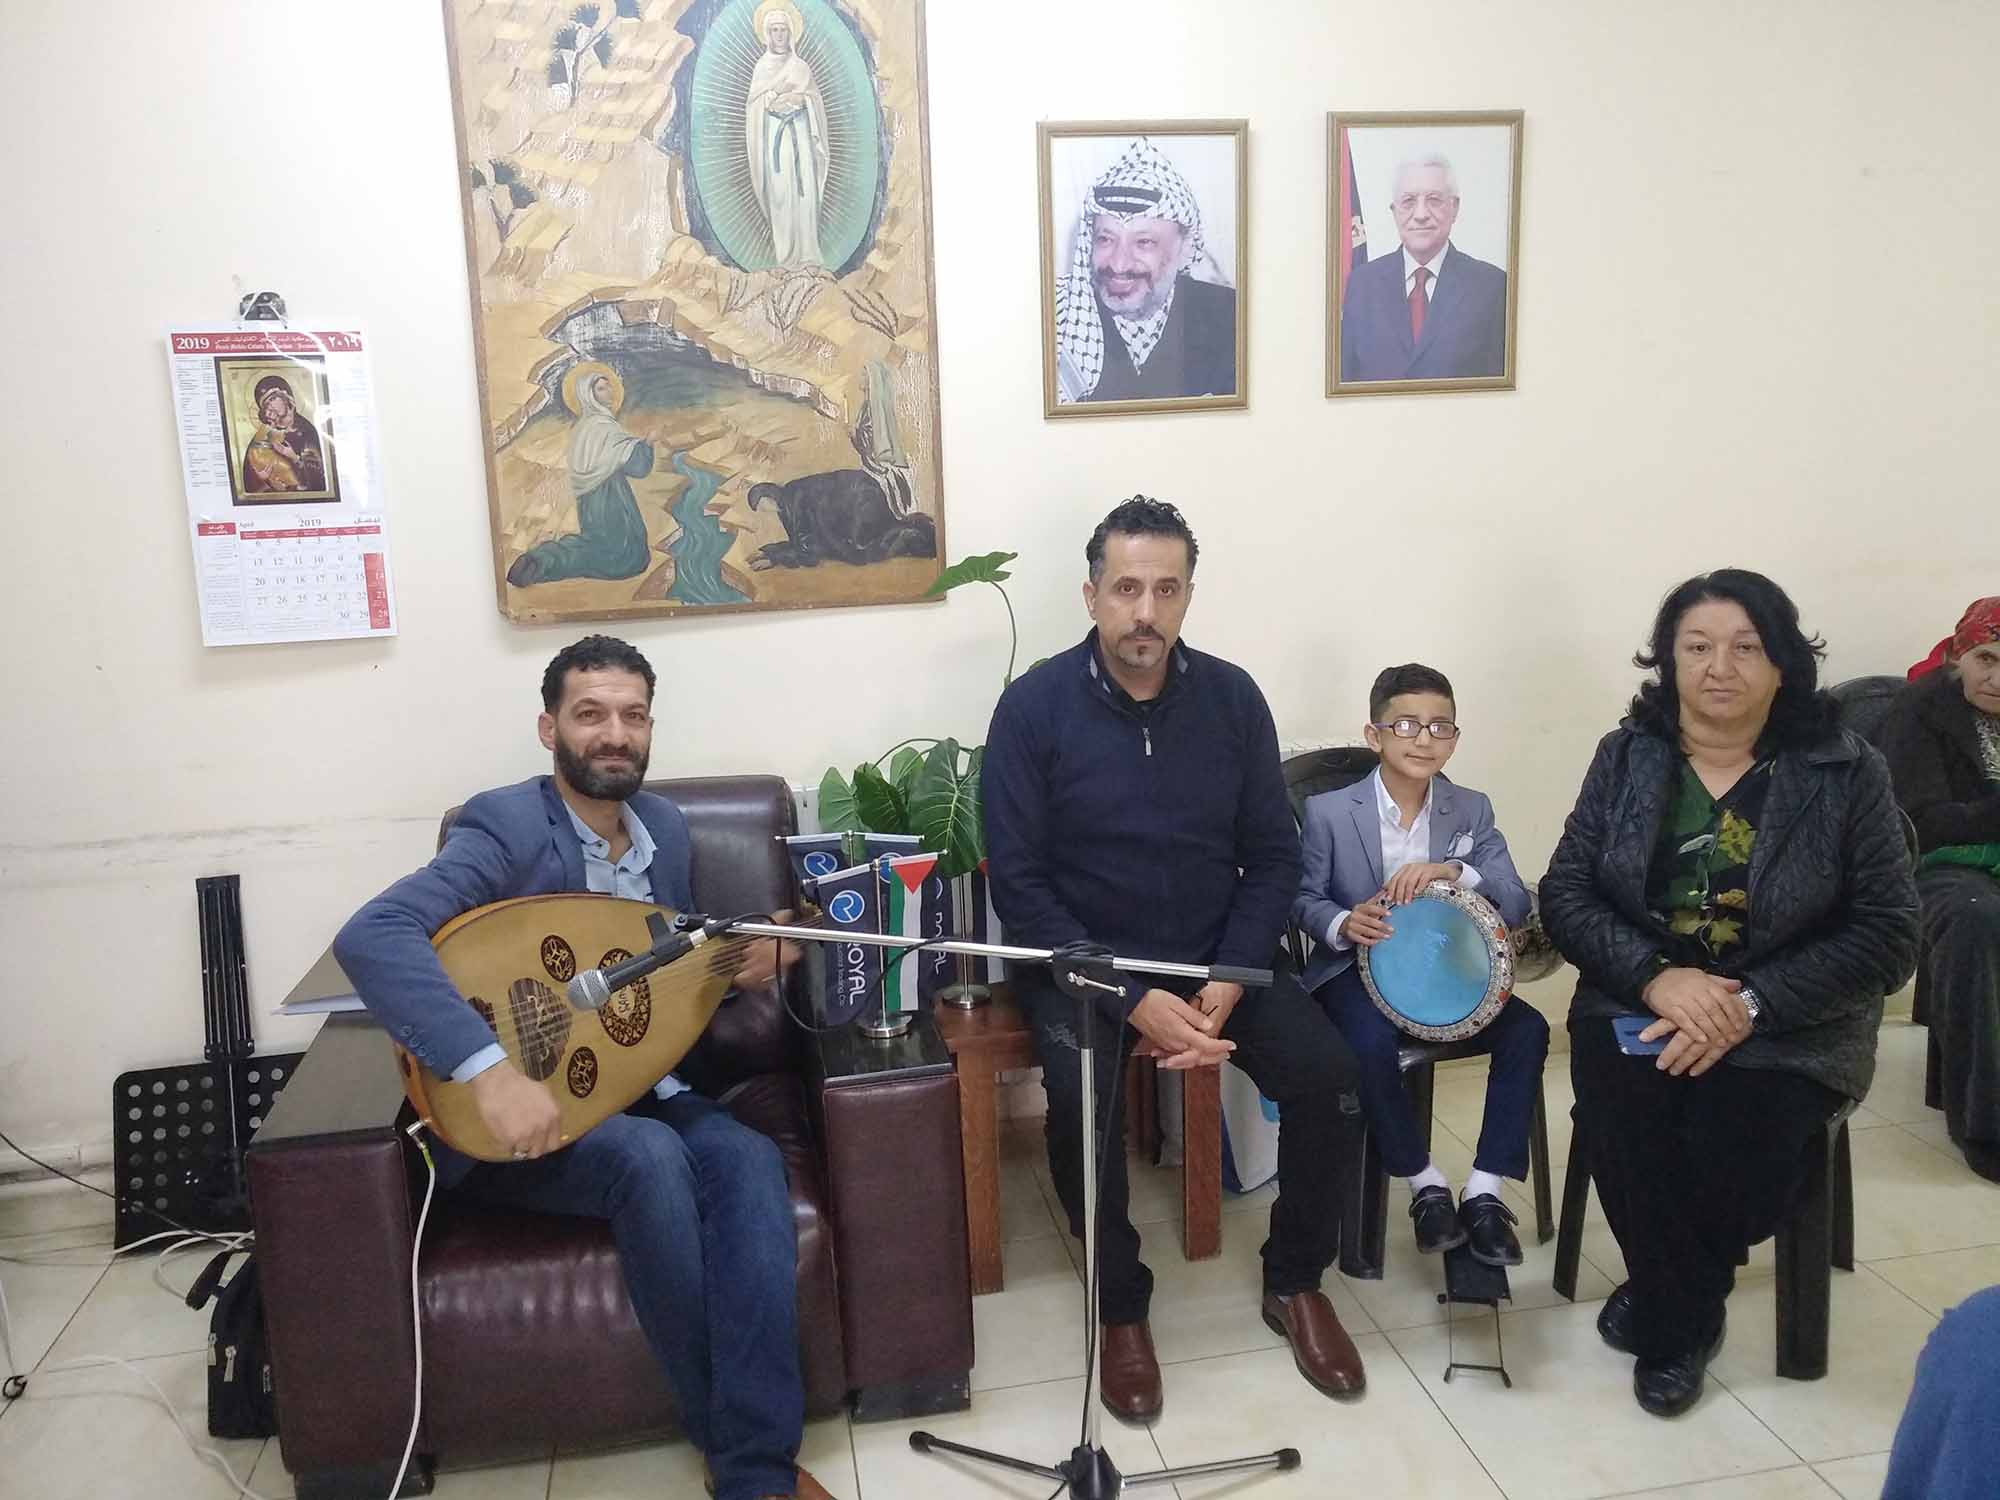 Royal is preparing a special event for the elderly home in Ramallah